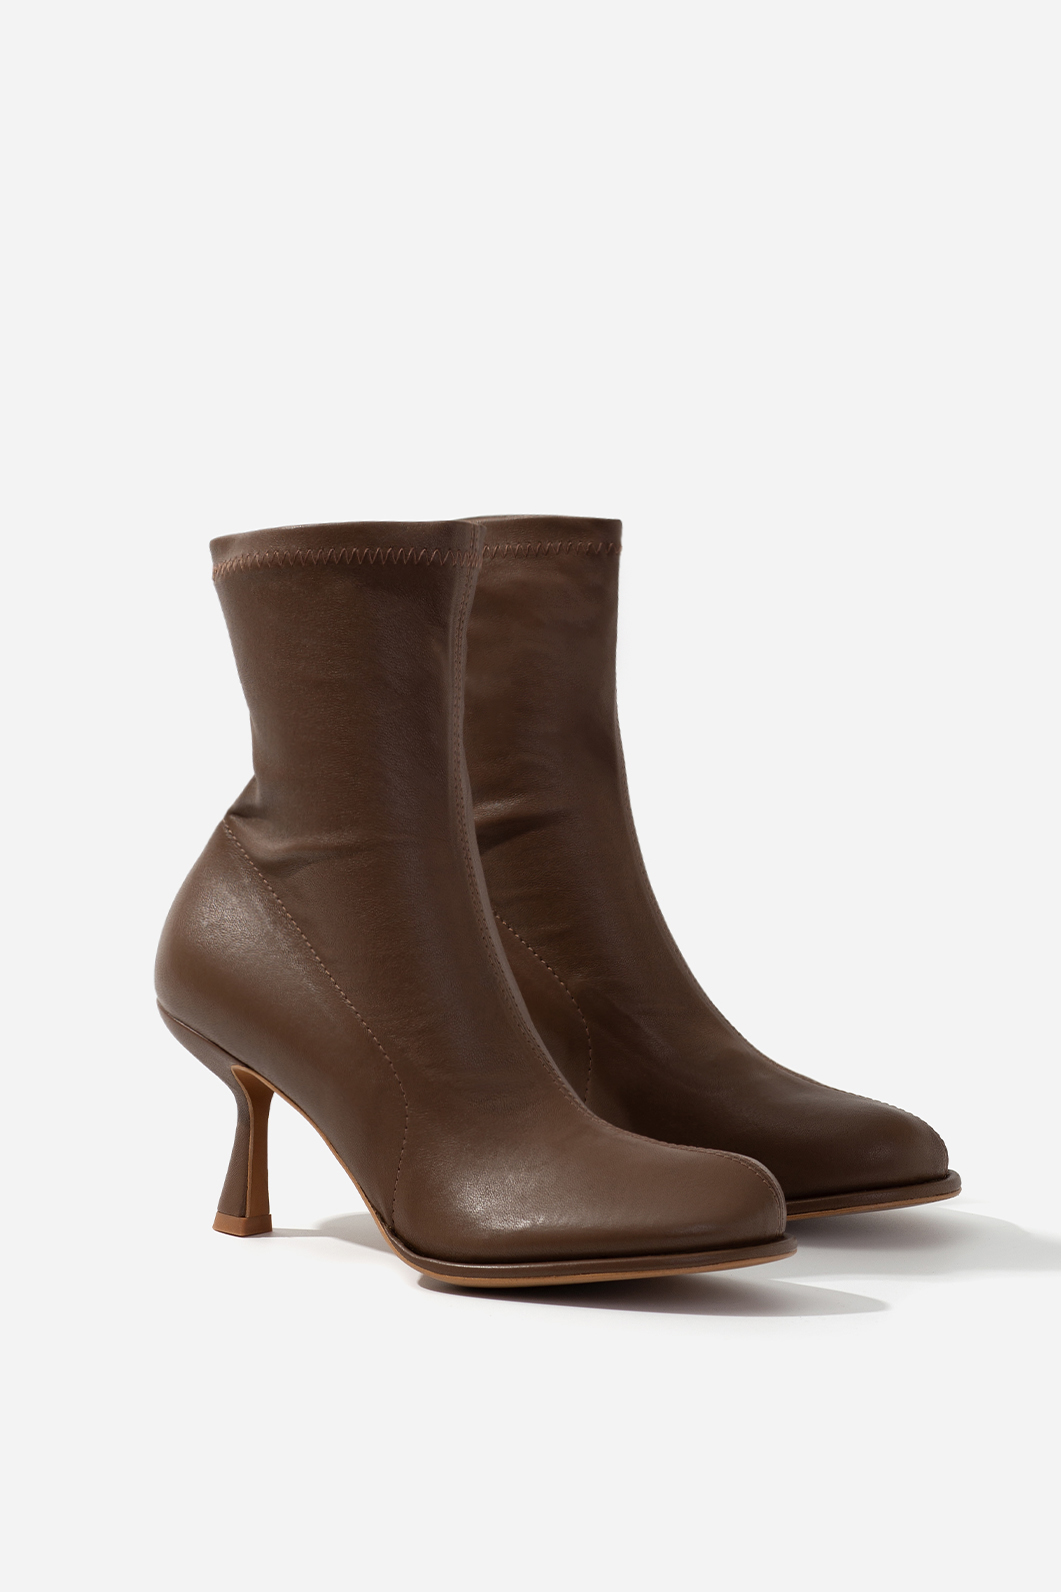 Blanca brown leather ankle boots /7 cm/